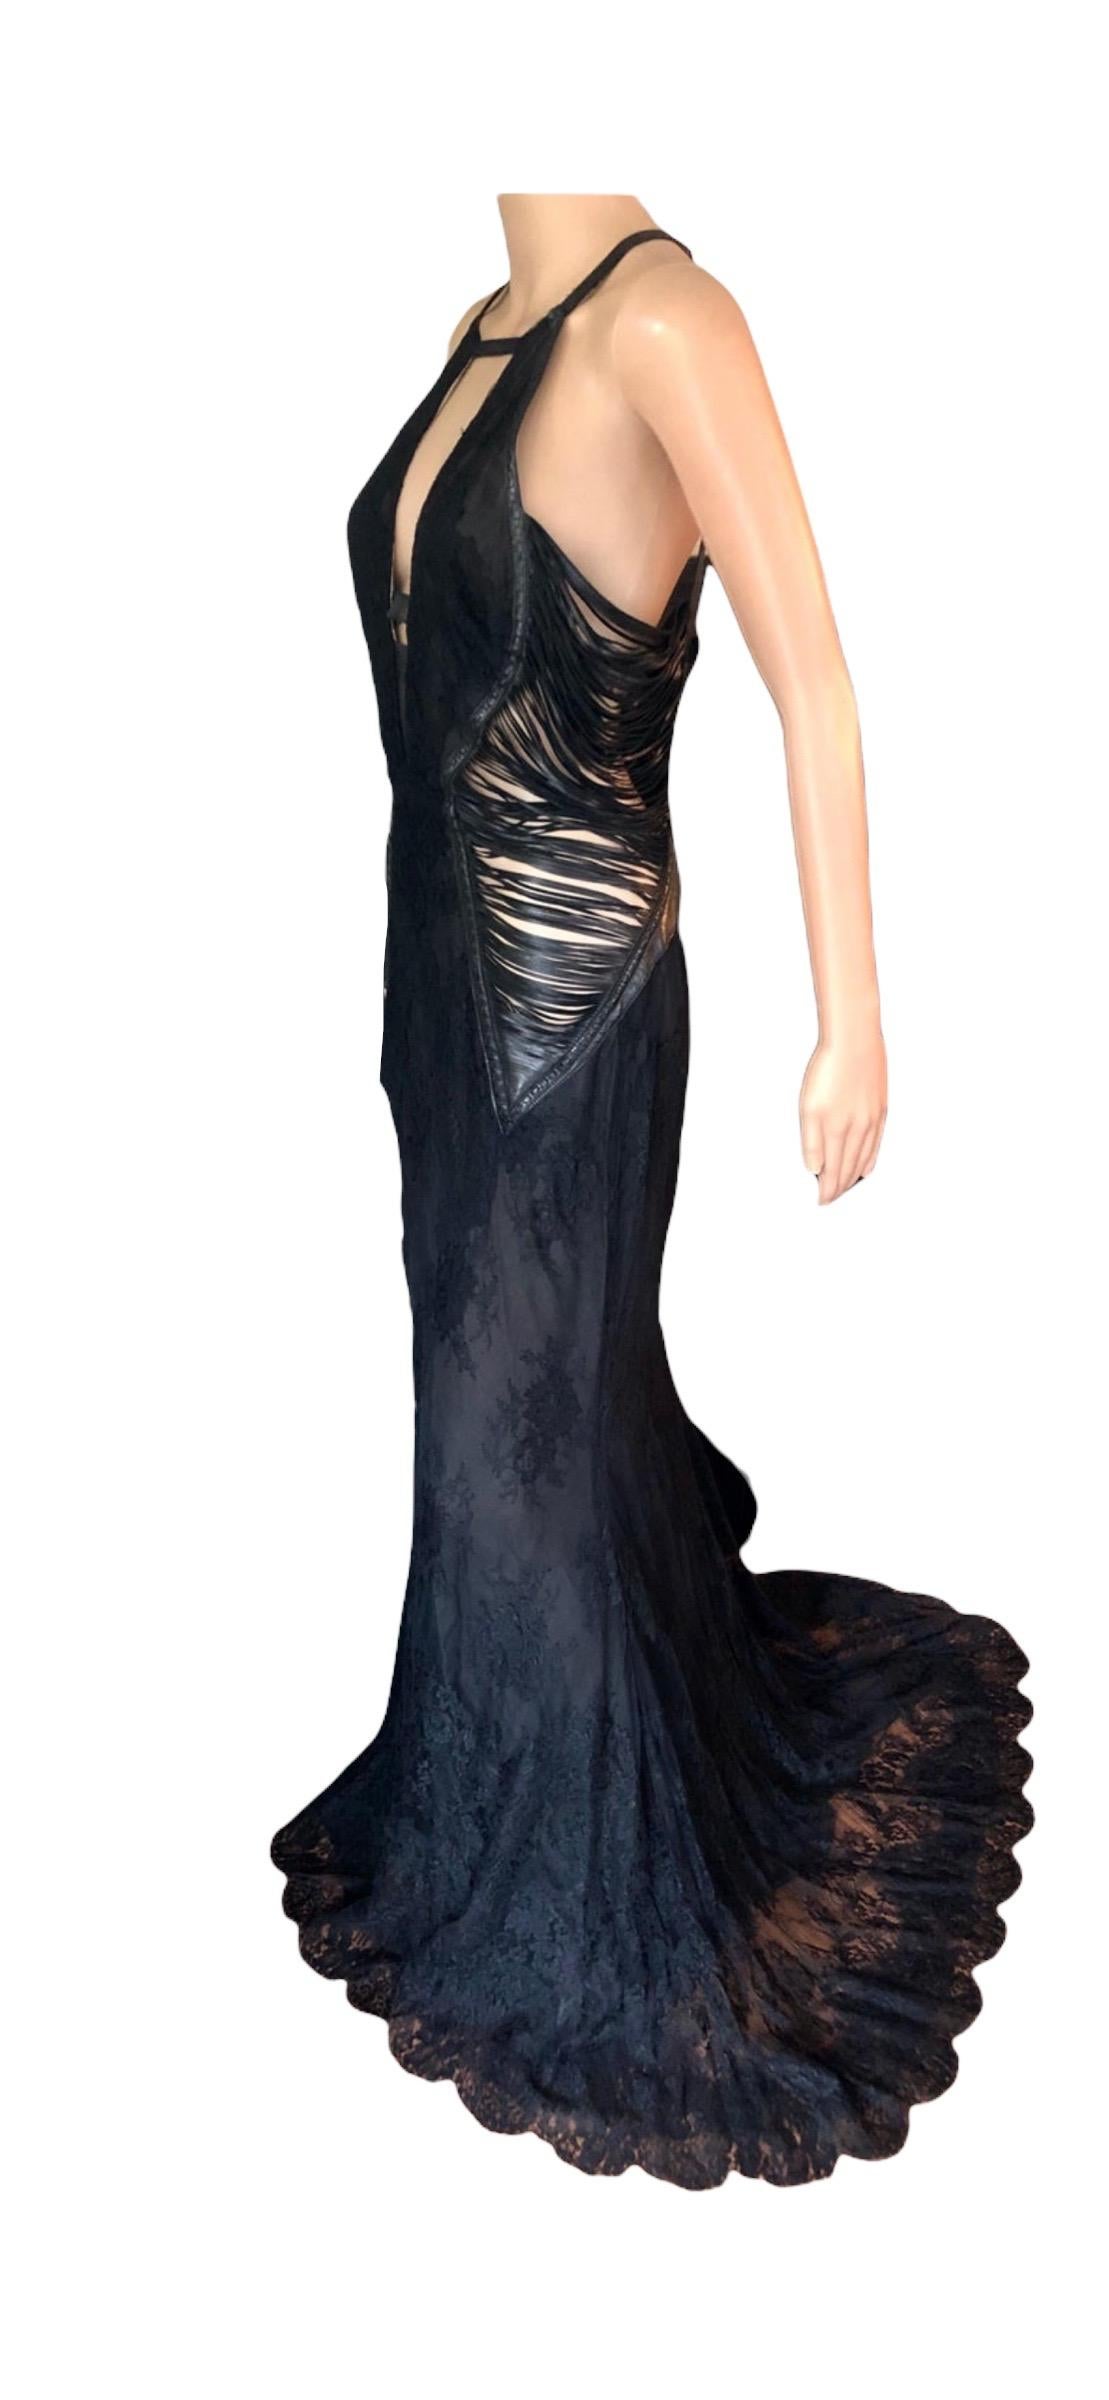 Roberto Cavalli S/S 2013 Leather Cutout Open Back Black Evening Dress Gown For Sale 6